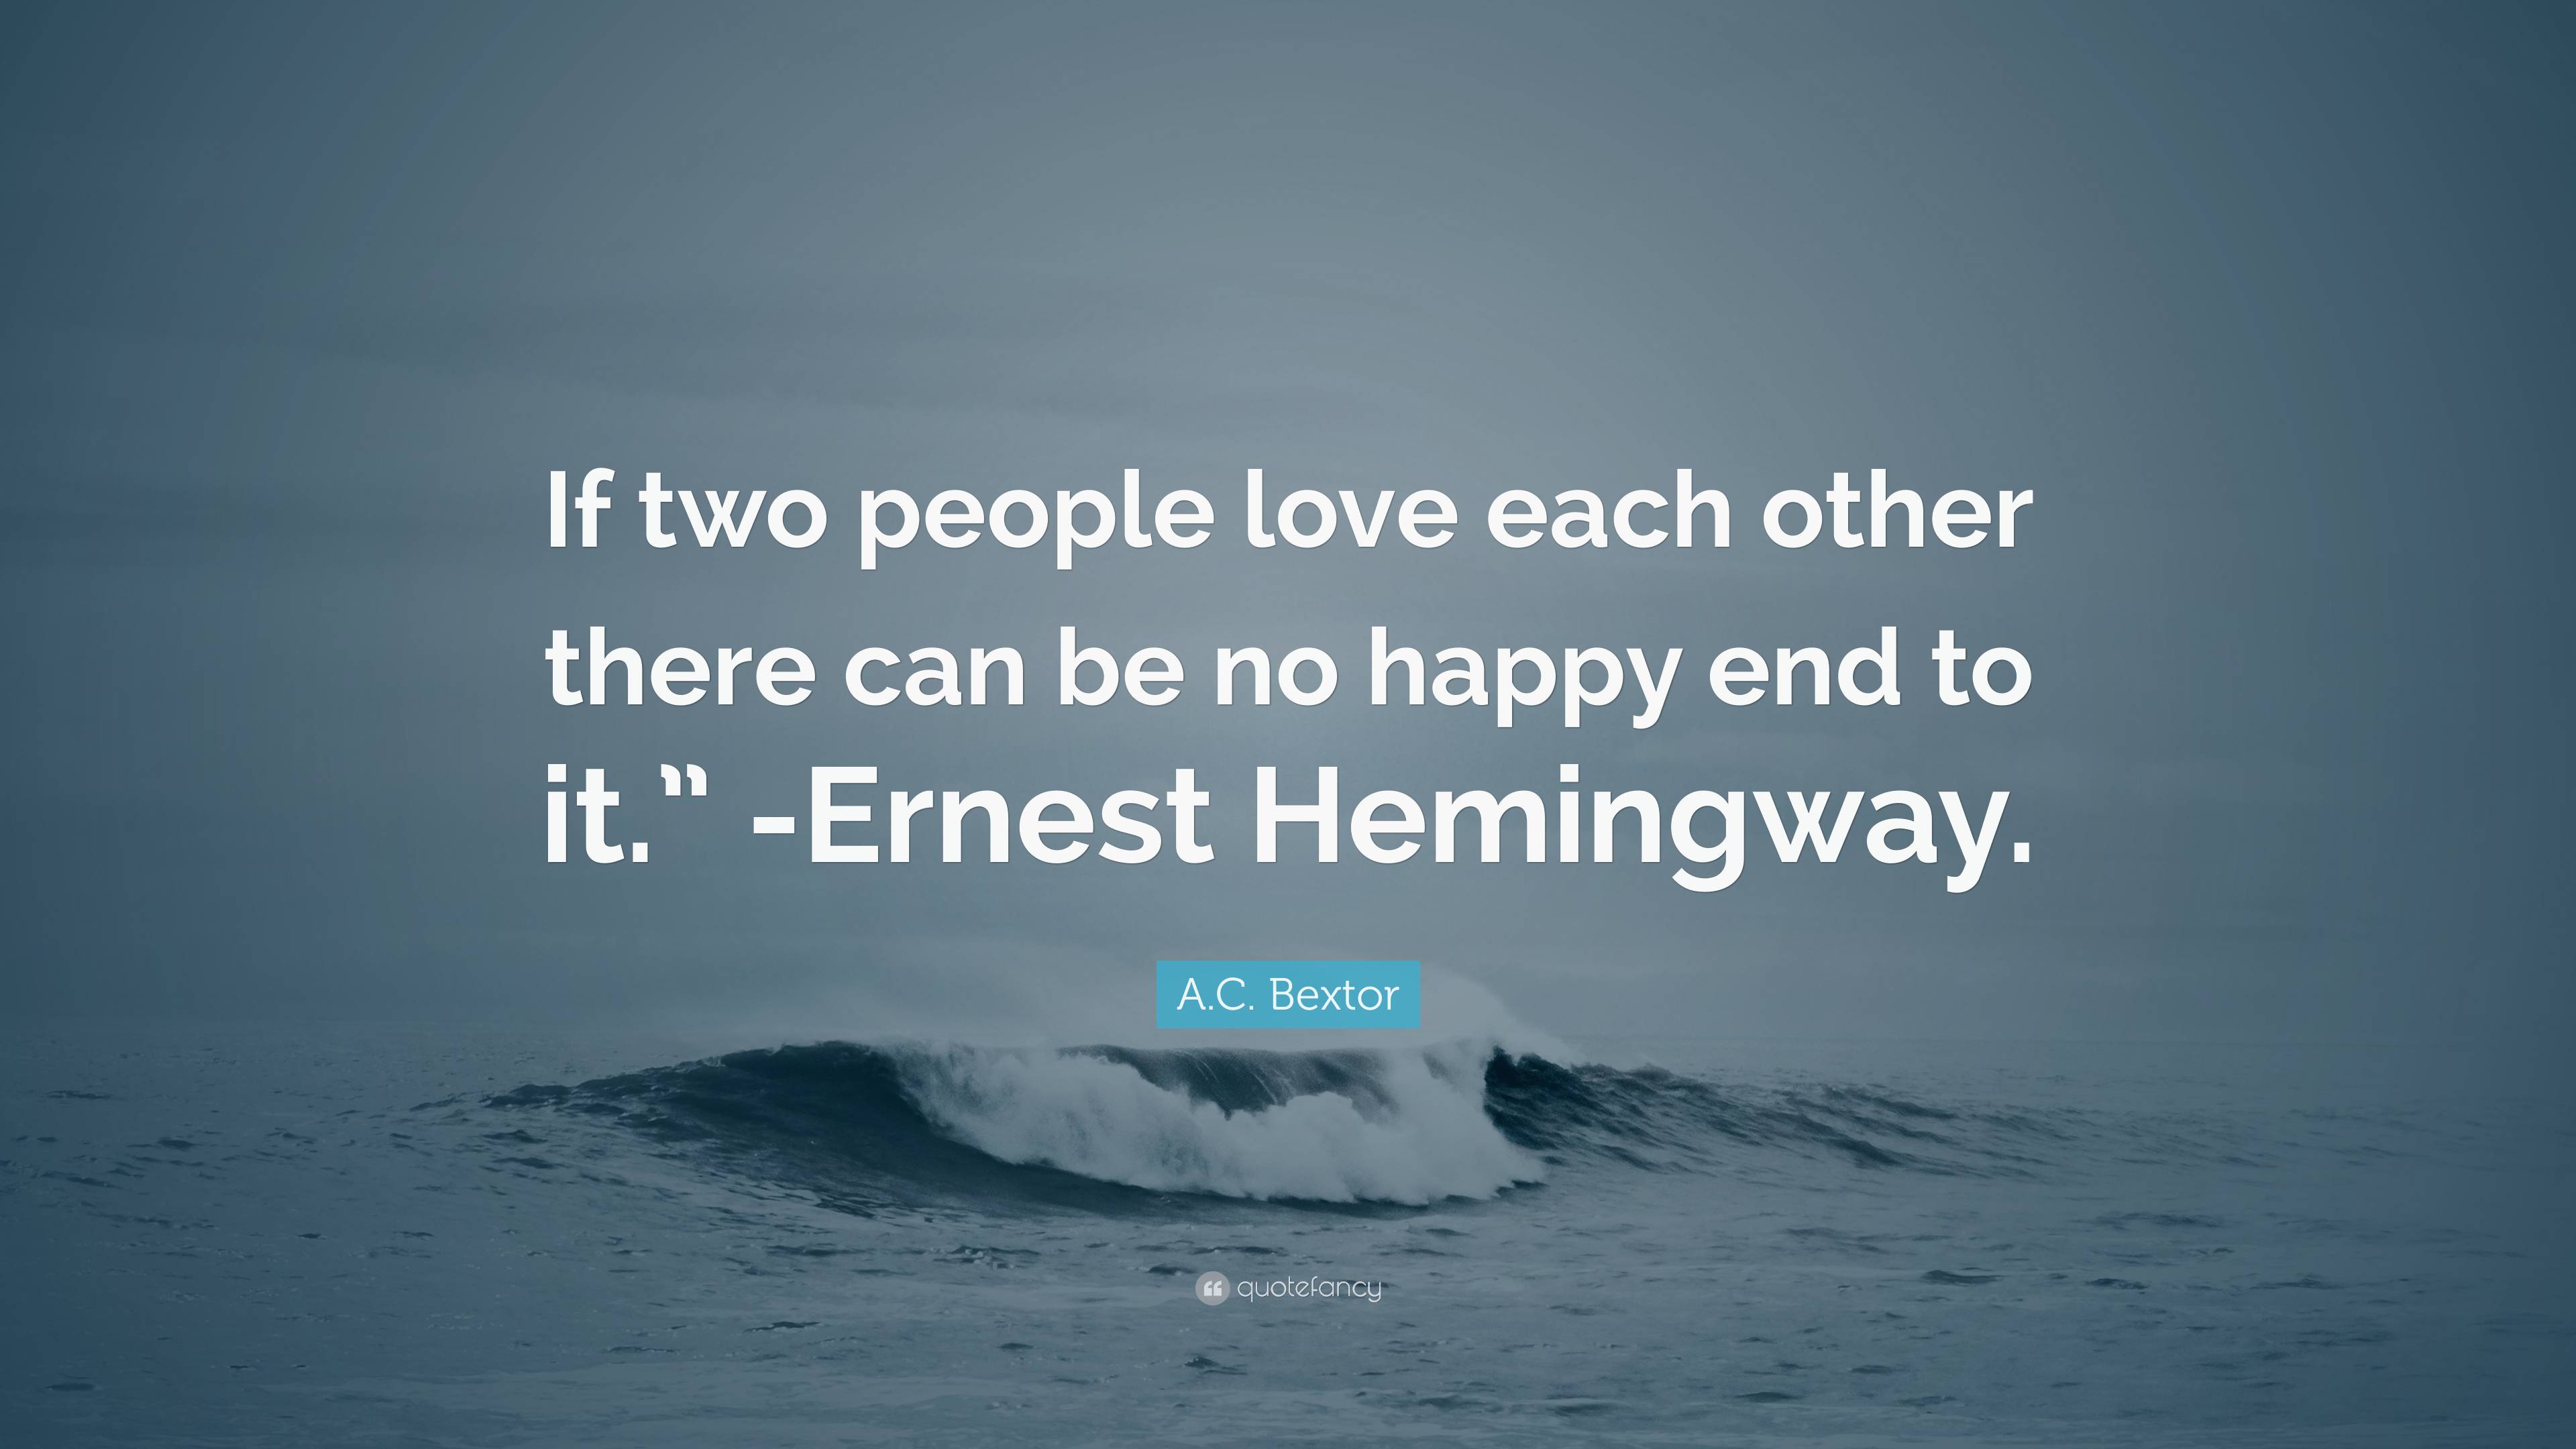 A.C. Bextor Quote: “If two people love each other there can be no happy ...